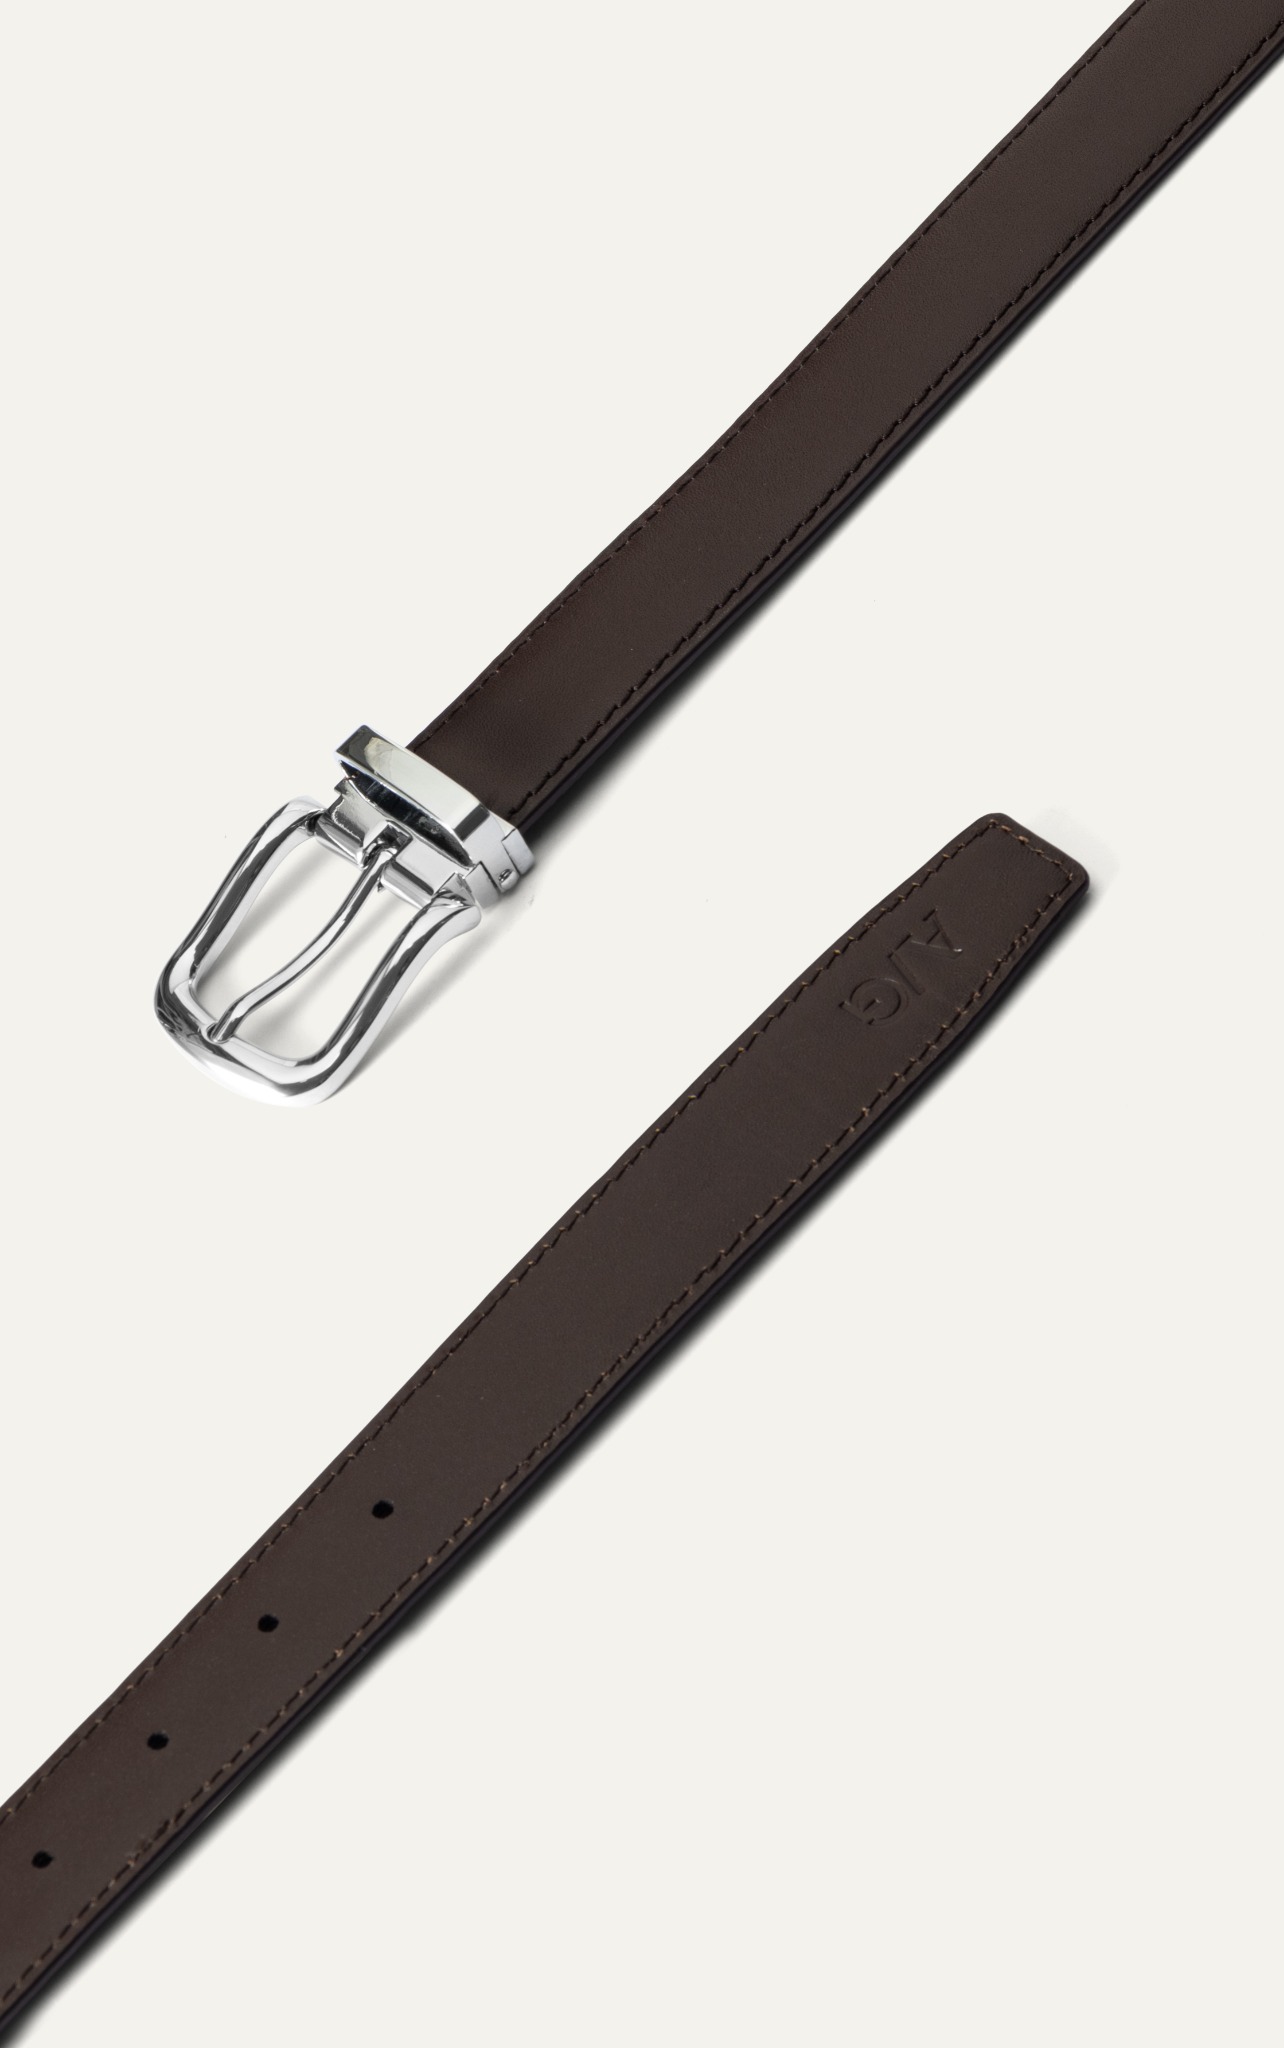 AG LEATHER BELTS BROWN - SQUARE HEAD SILVER